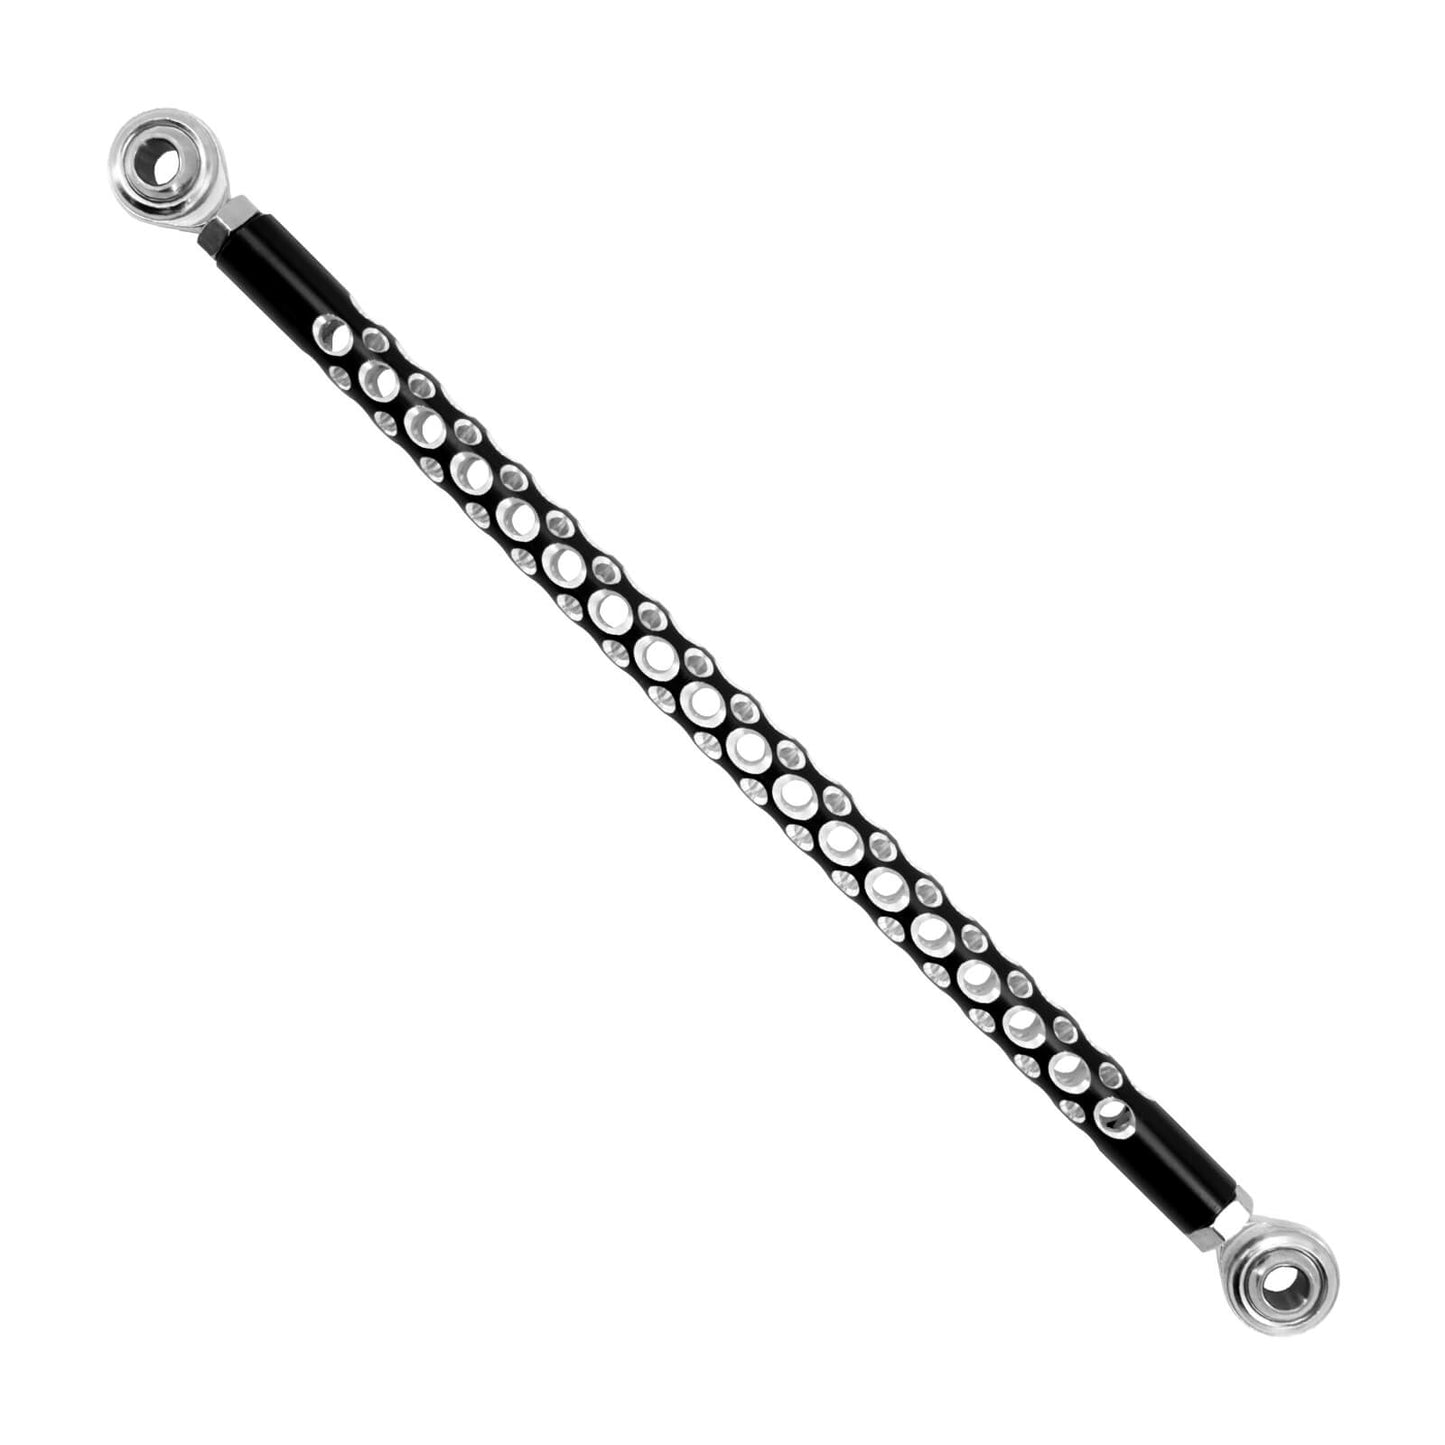 PE006702-mactions-motorcycle-shift-linkage-for-harley-black